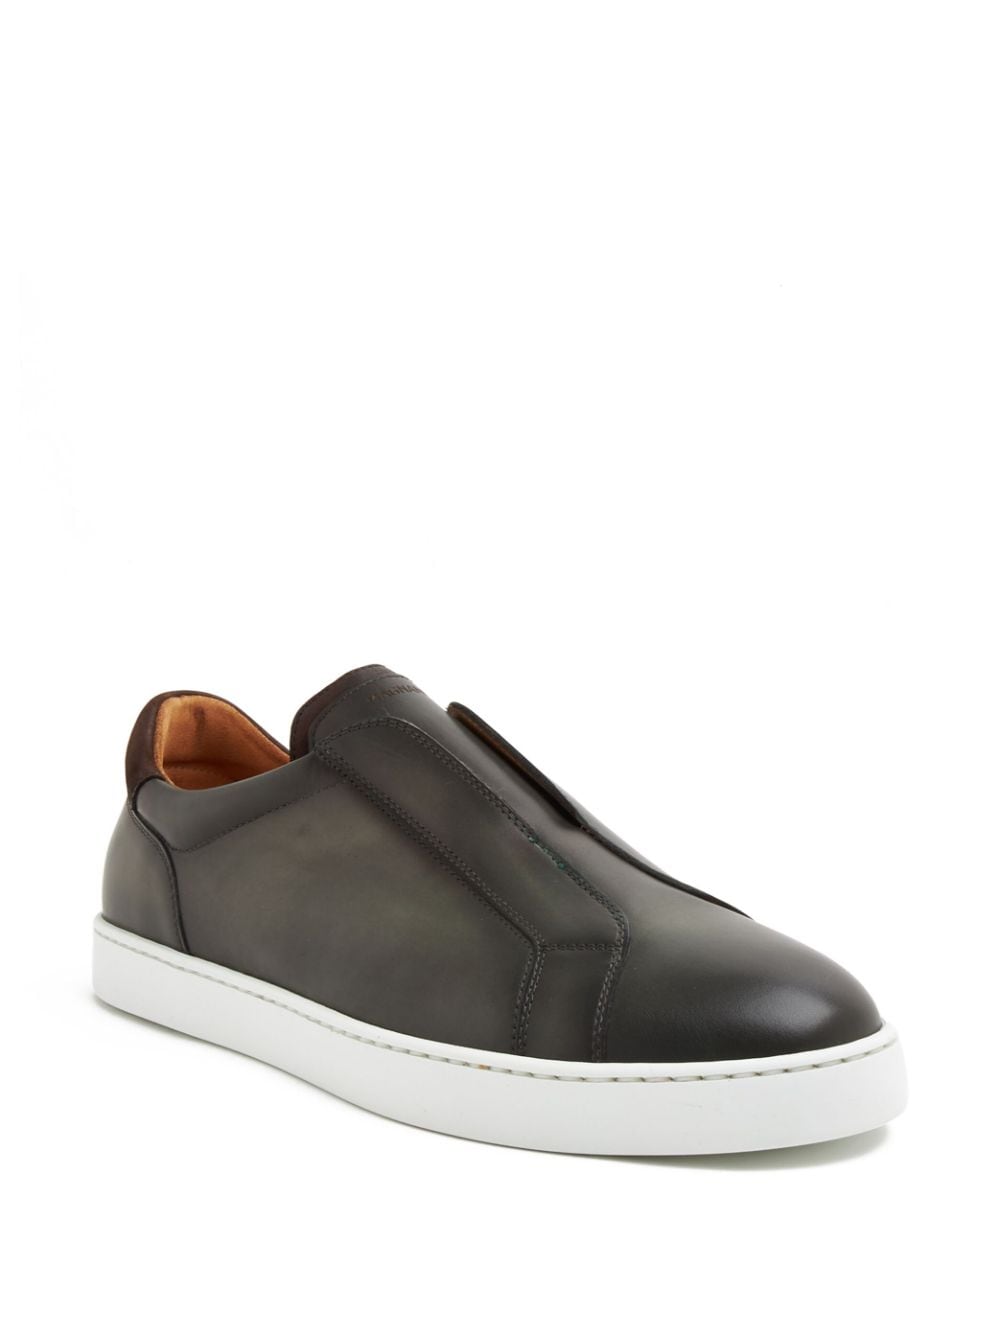 Magnanni Costa slip-on Leather Sneakers - Farfetch